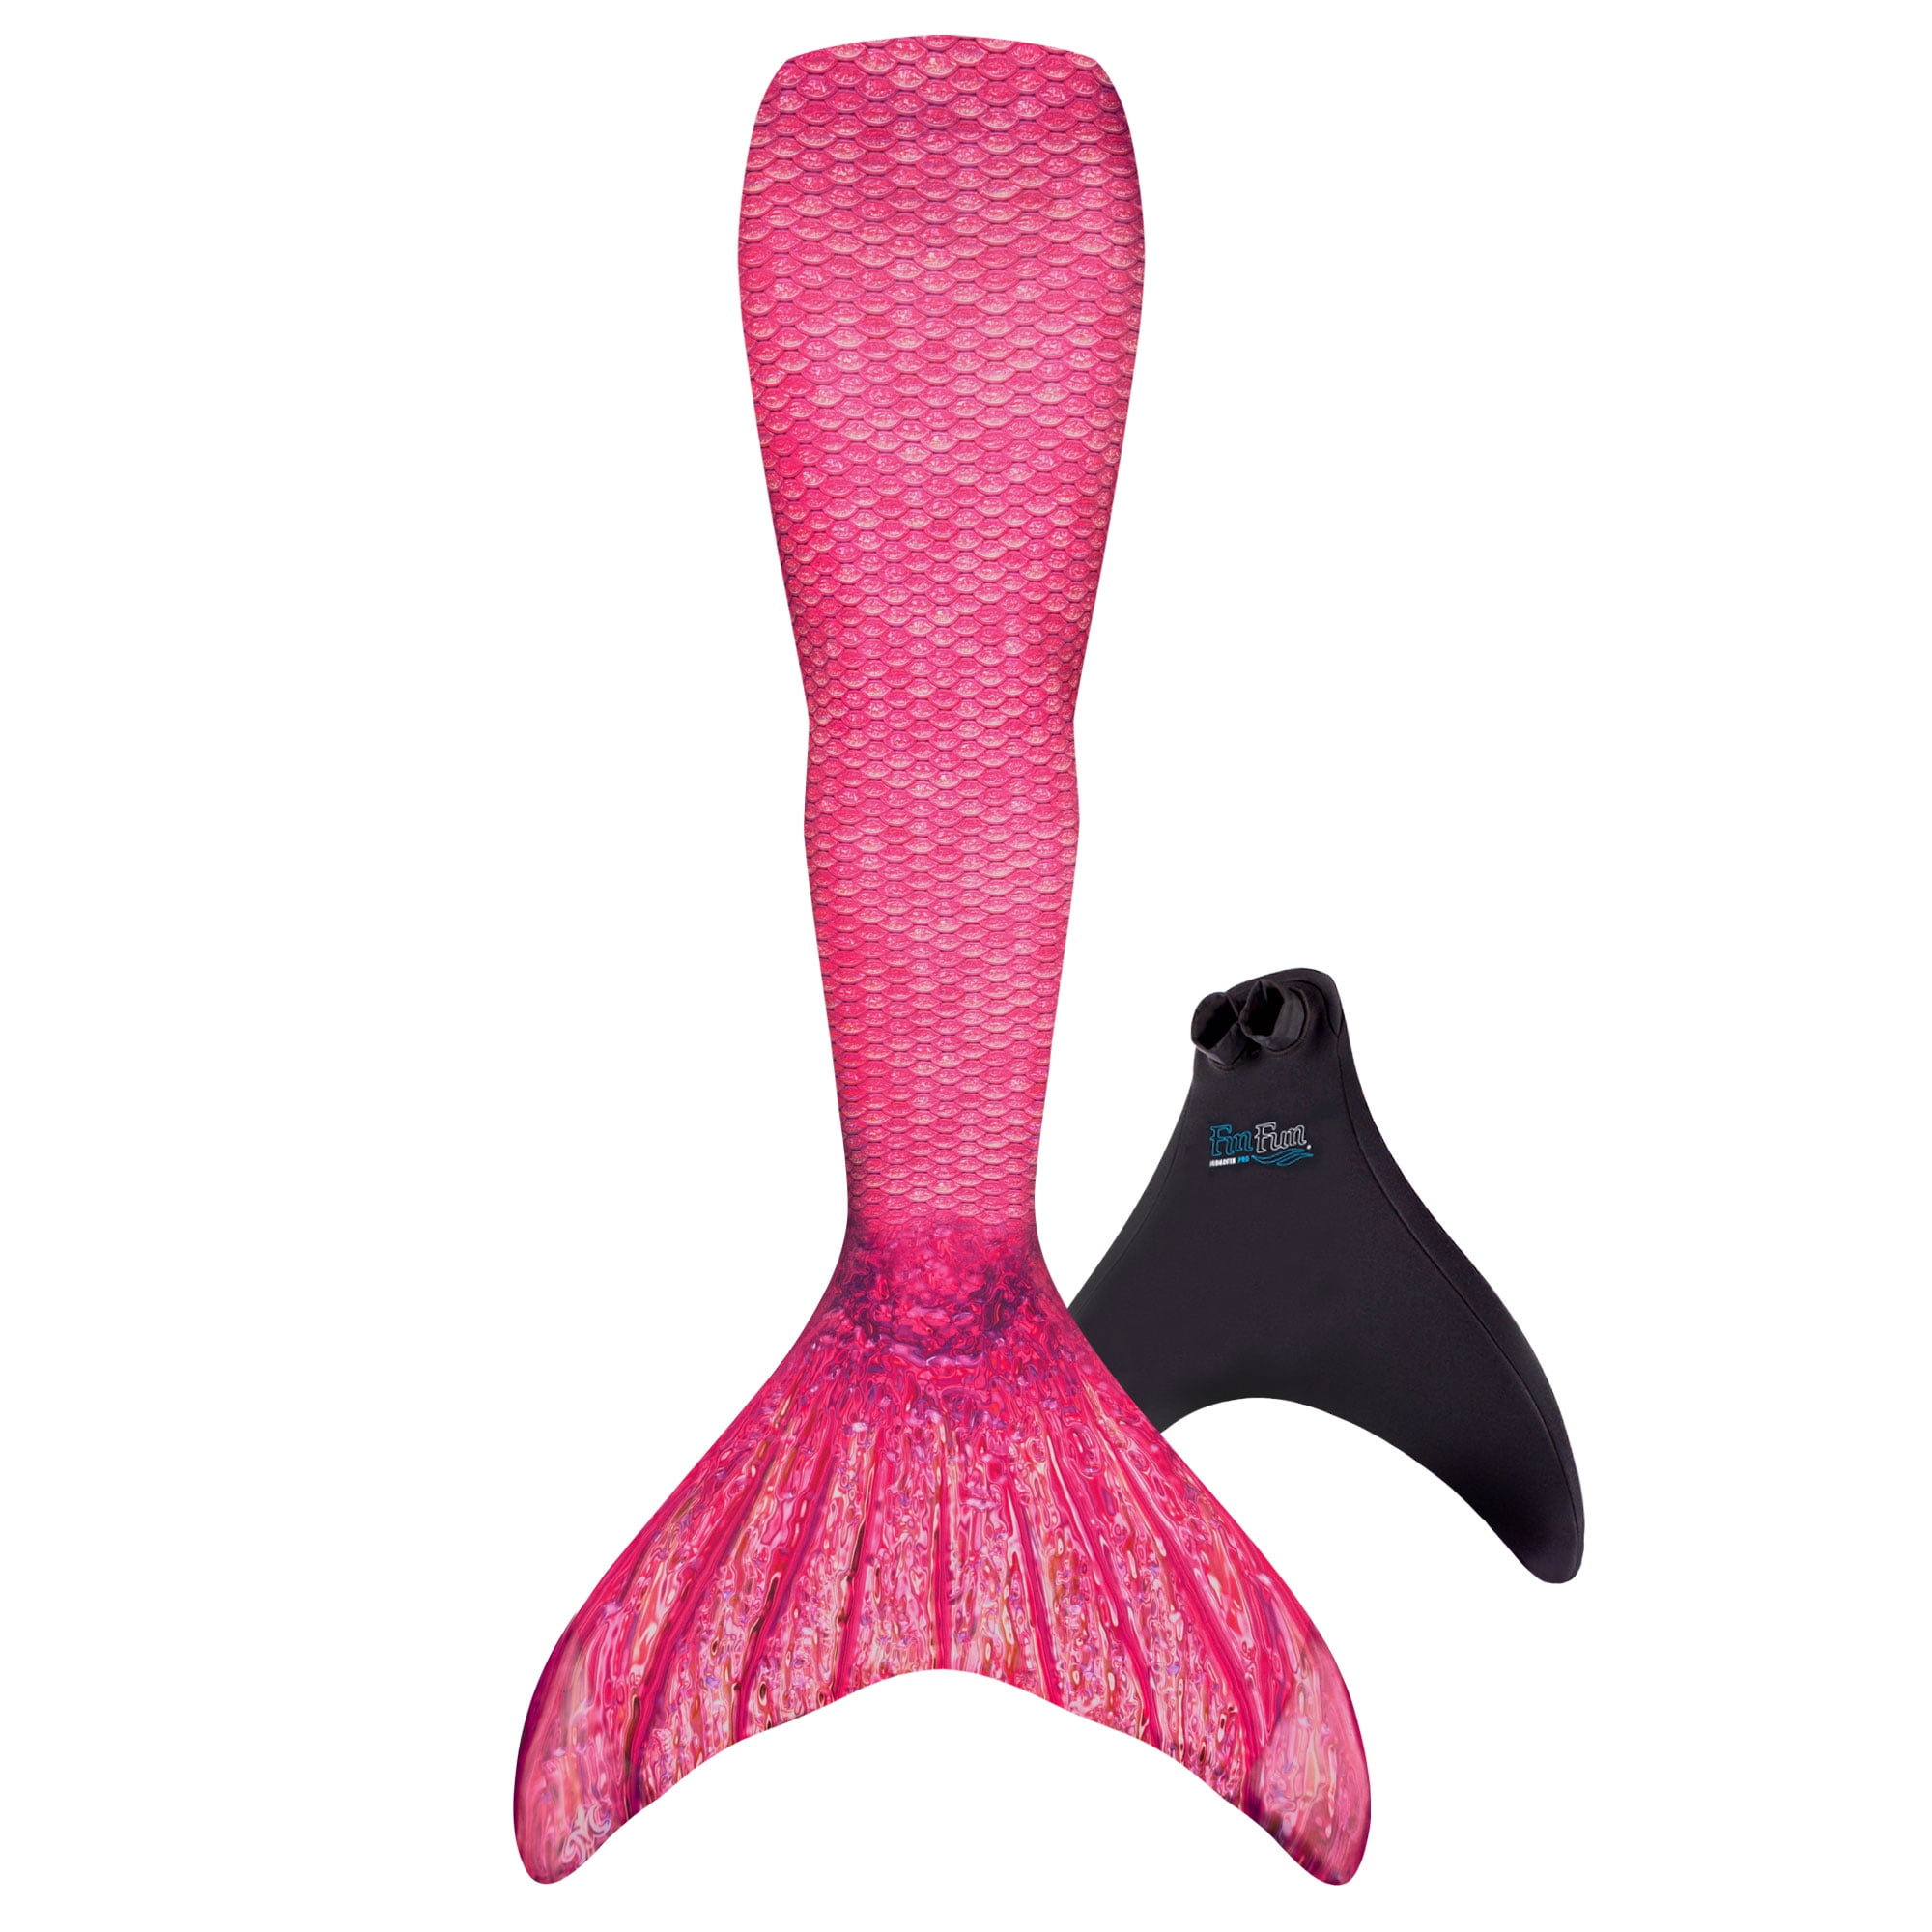 Kids & Adults Fin Fun Mermaid Tails for Swimming with Monofin Girls Boys 